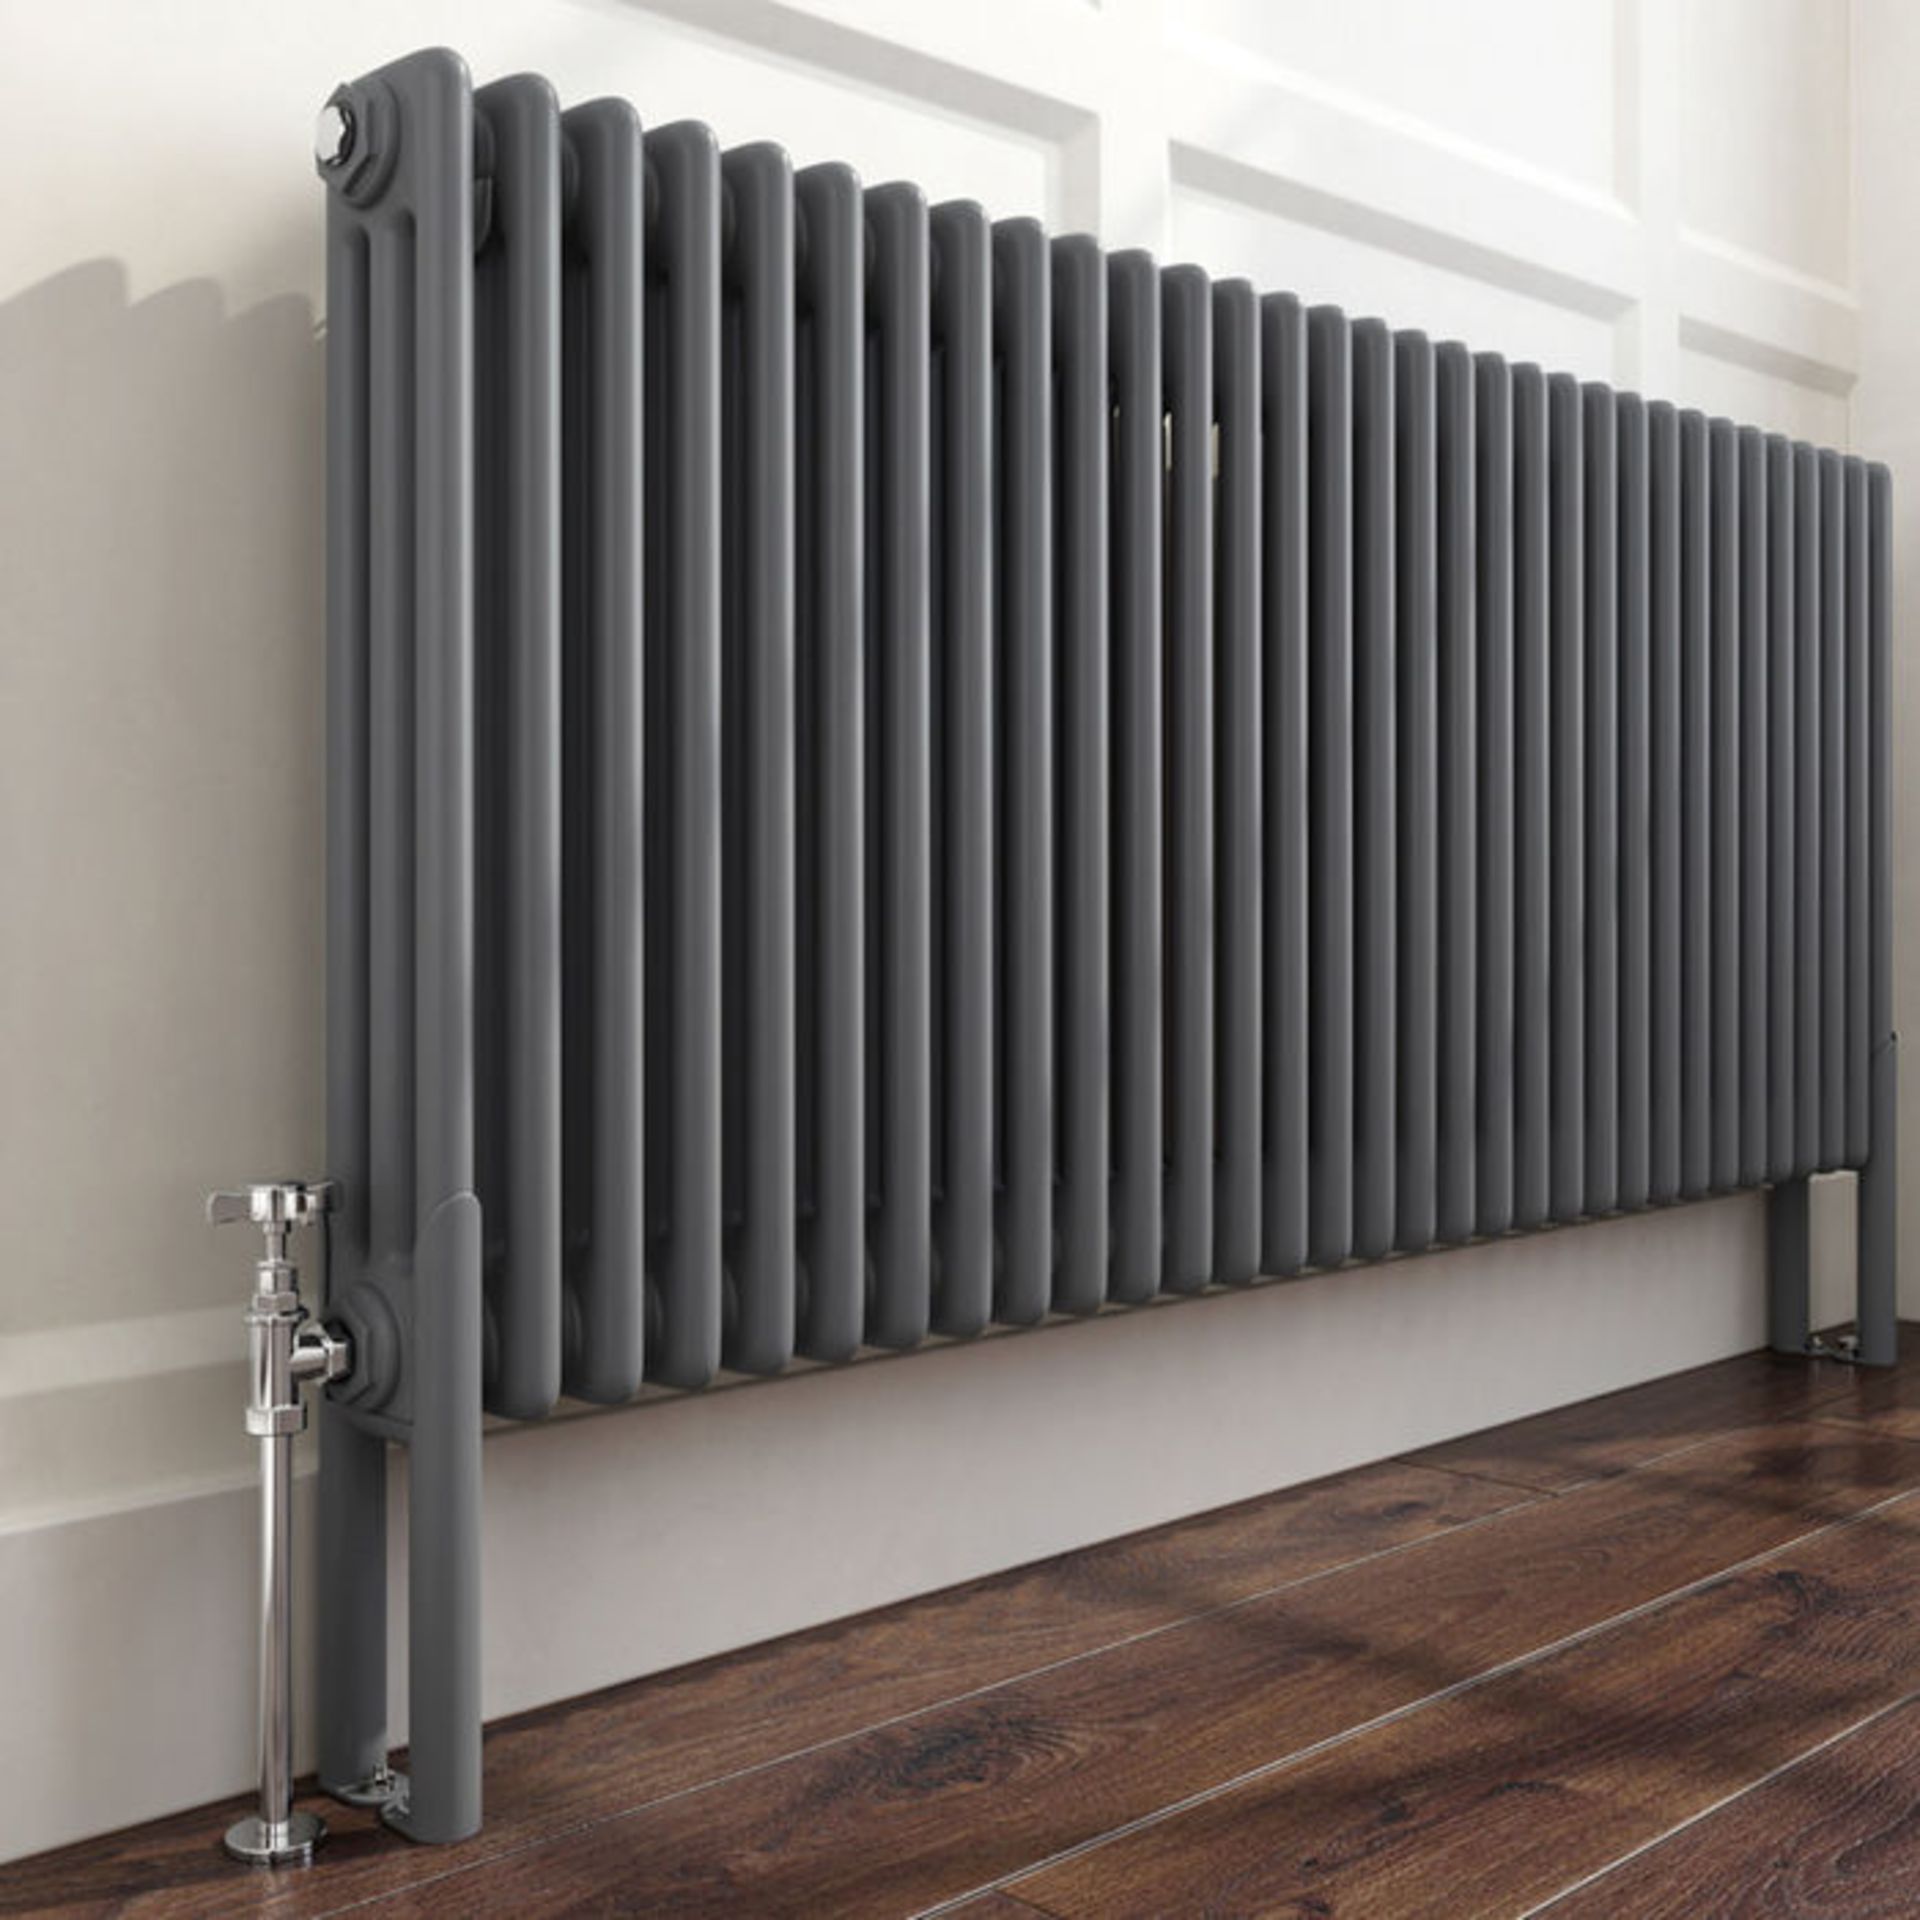 (PT261) 600x1444mm Anthracite Triple Panel Horizontal Colosseum Traditional Radiator. RRP £609.99. - Image 2 of 4